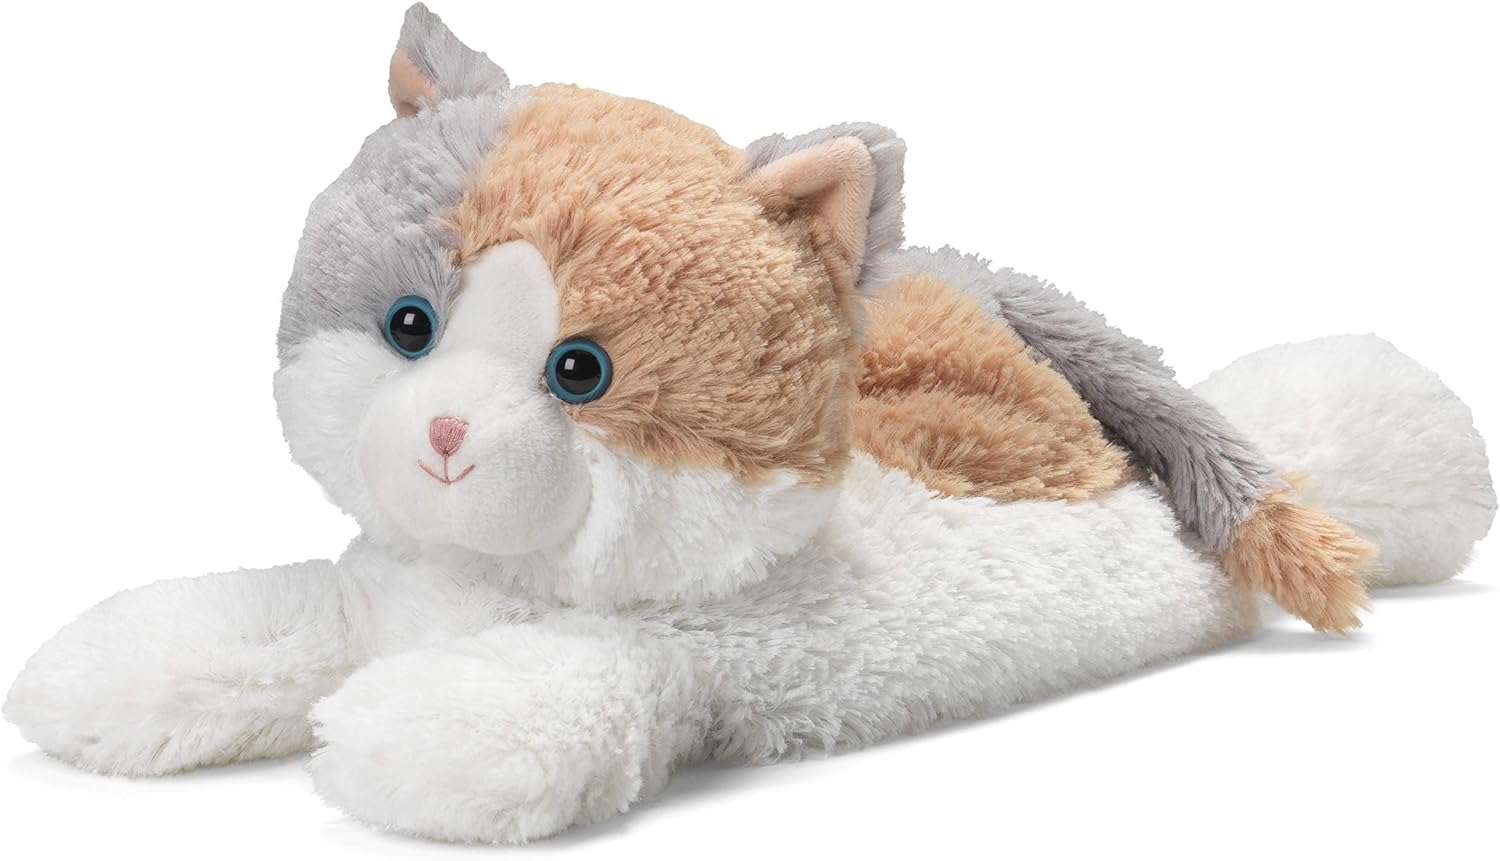 Warmies – Microwavable Lavender Scented Weighted Plush Animals – Calico Cat